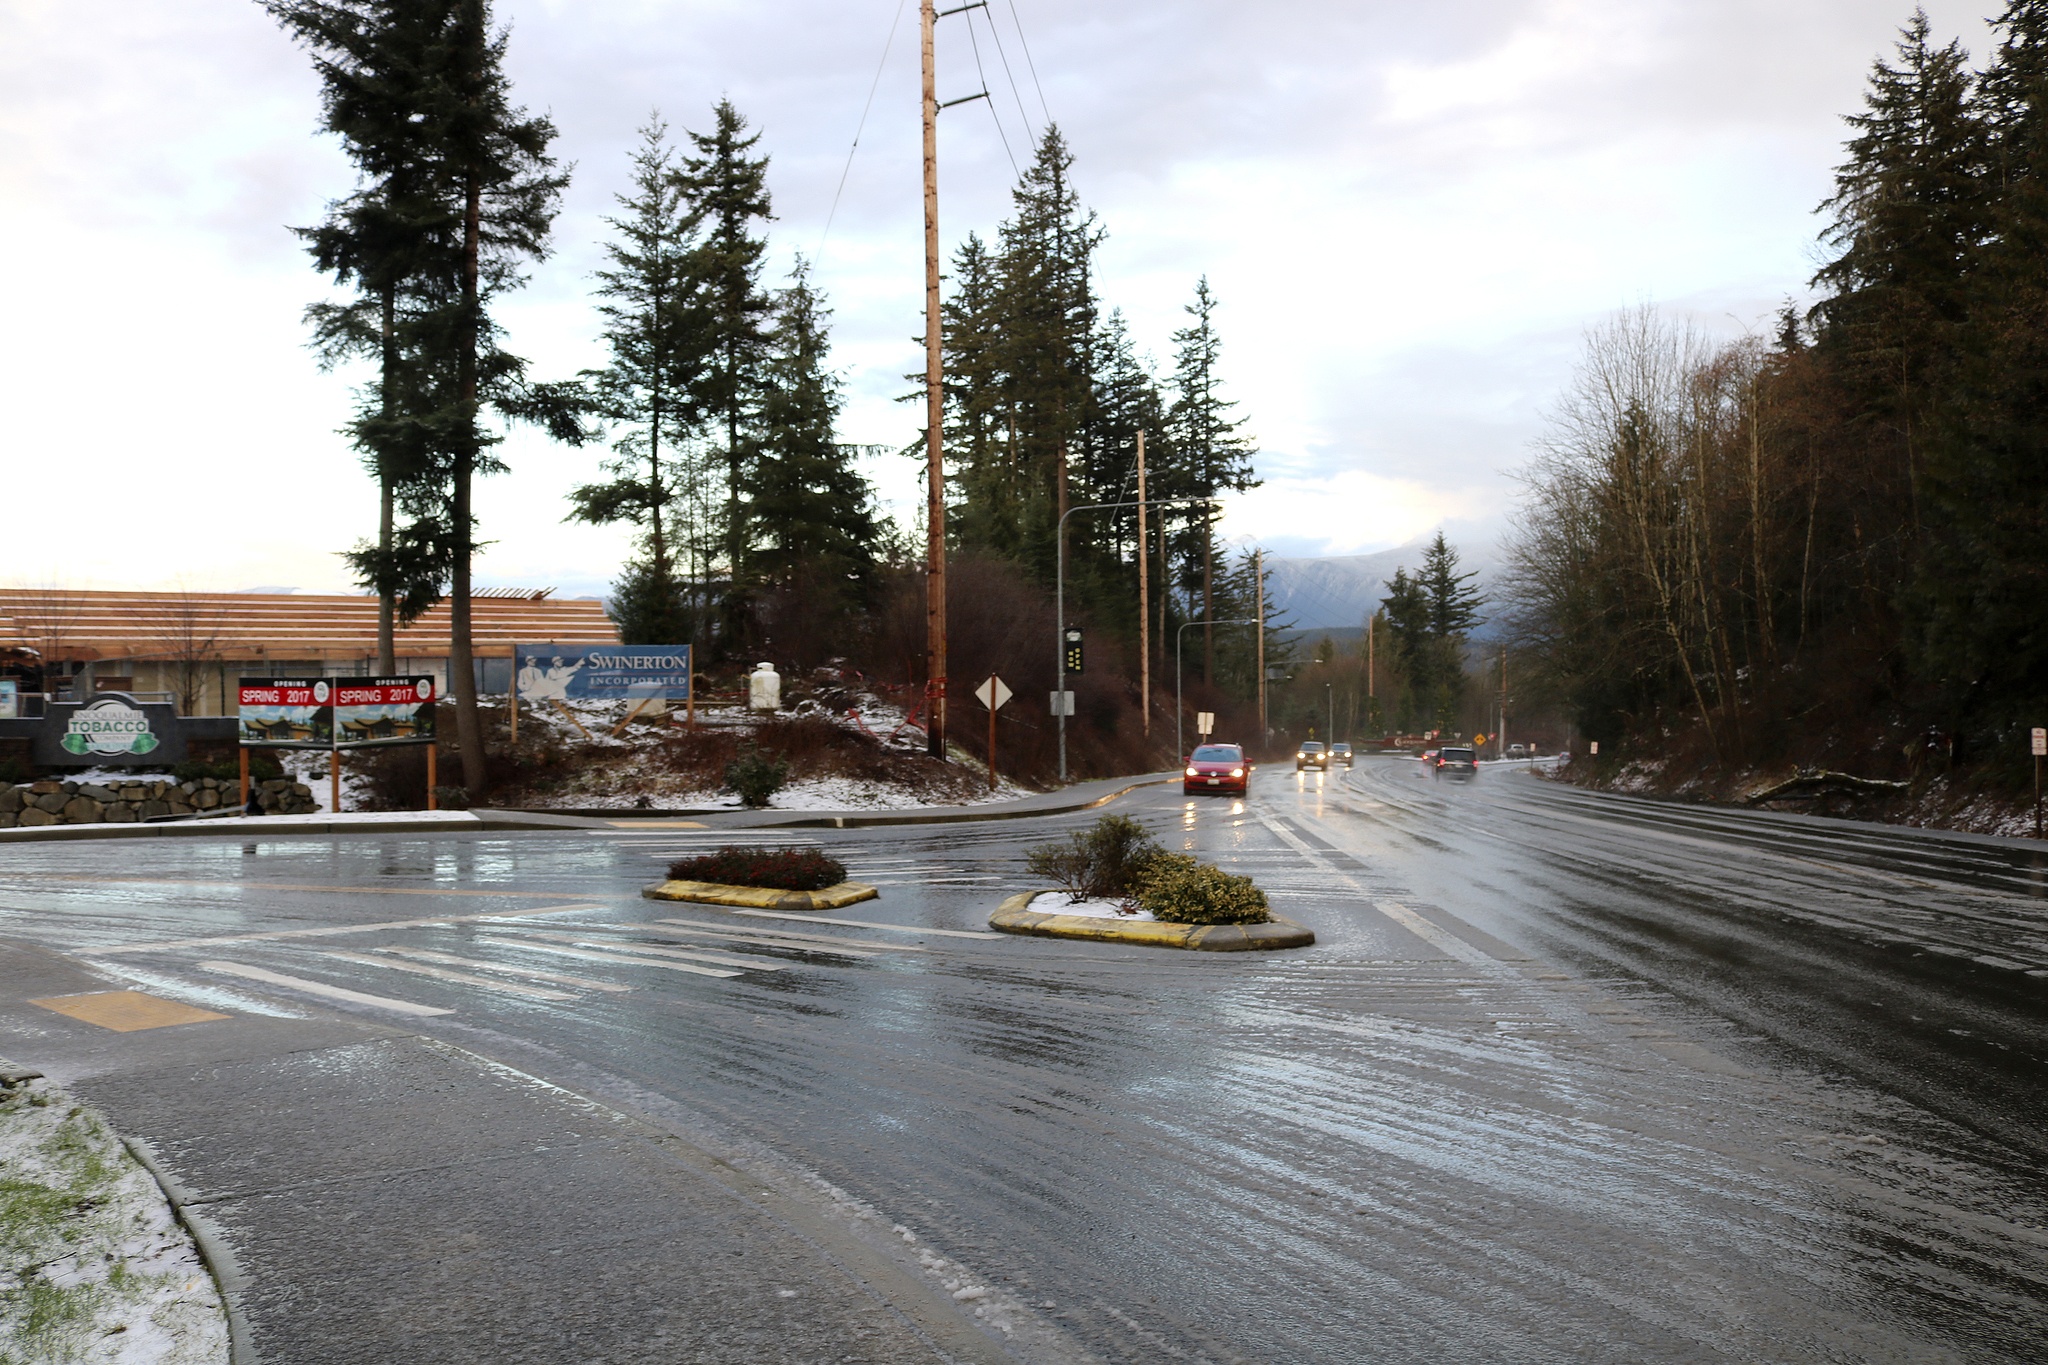 This intersection is the proposed site for a new roundabout, to be built by the Snoqualmie Tribe to service its new gas station and convenience store, now under construction. Evan Pappas/Staff Photo